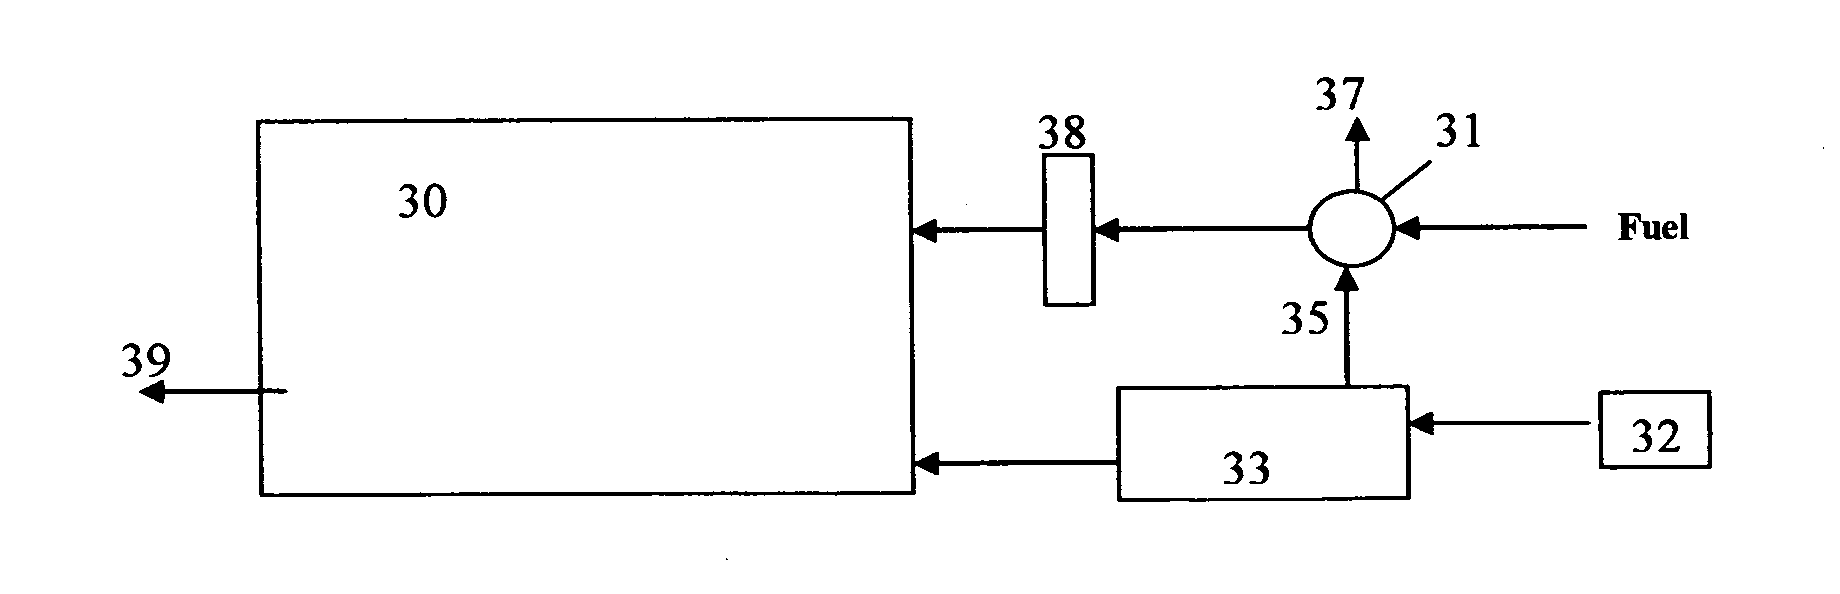 Method of producing hypoxic environments in enclosed compartments employing fuel cell technology